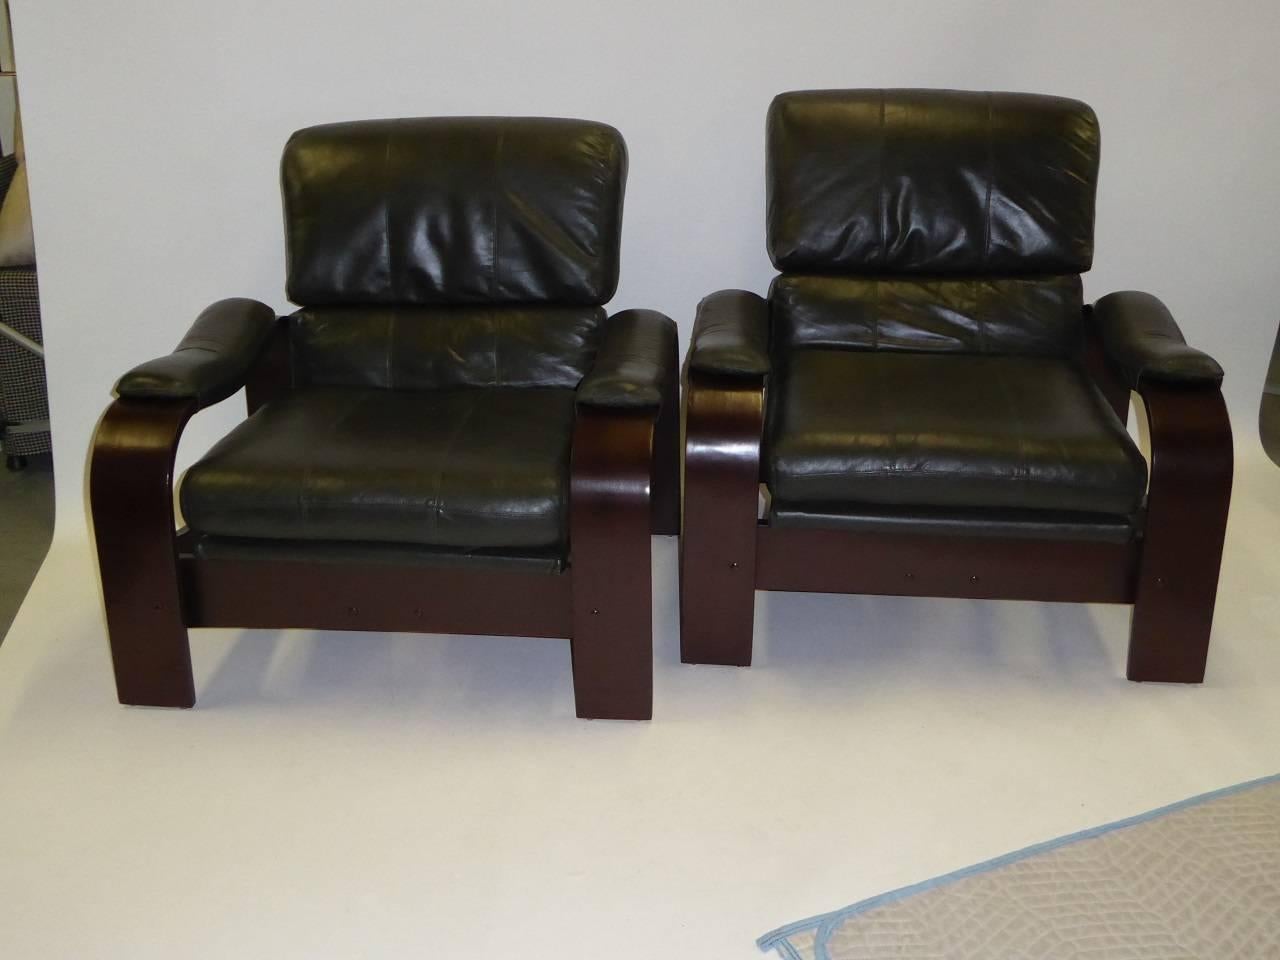 REDUCED FROM $3,450.
Pair of green leather and bentwood lounge chairs in the style of Alvar Aalto, the iconic Finnish designer. Supple and soft dark green leather cushions and arm pads highlight this pair with dark brown painted wood forms with the